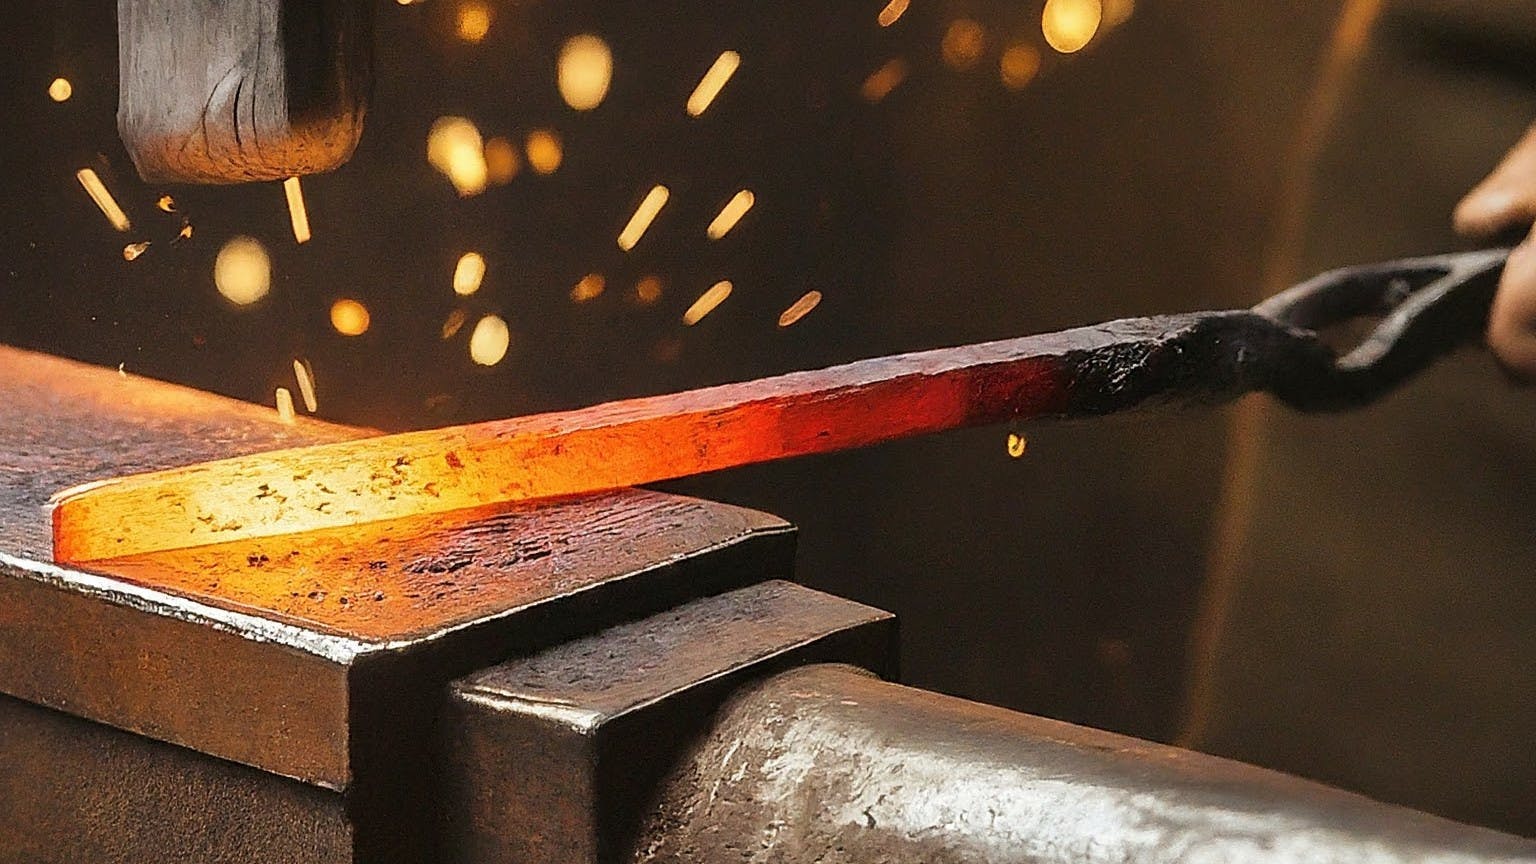 A metalworker hammering a red-hot piece of metal on an anvil.